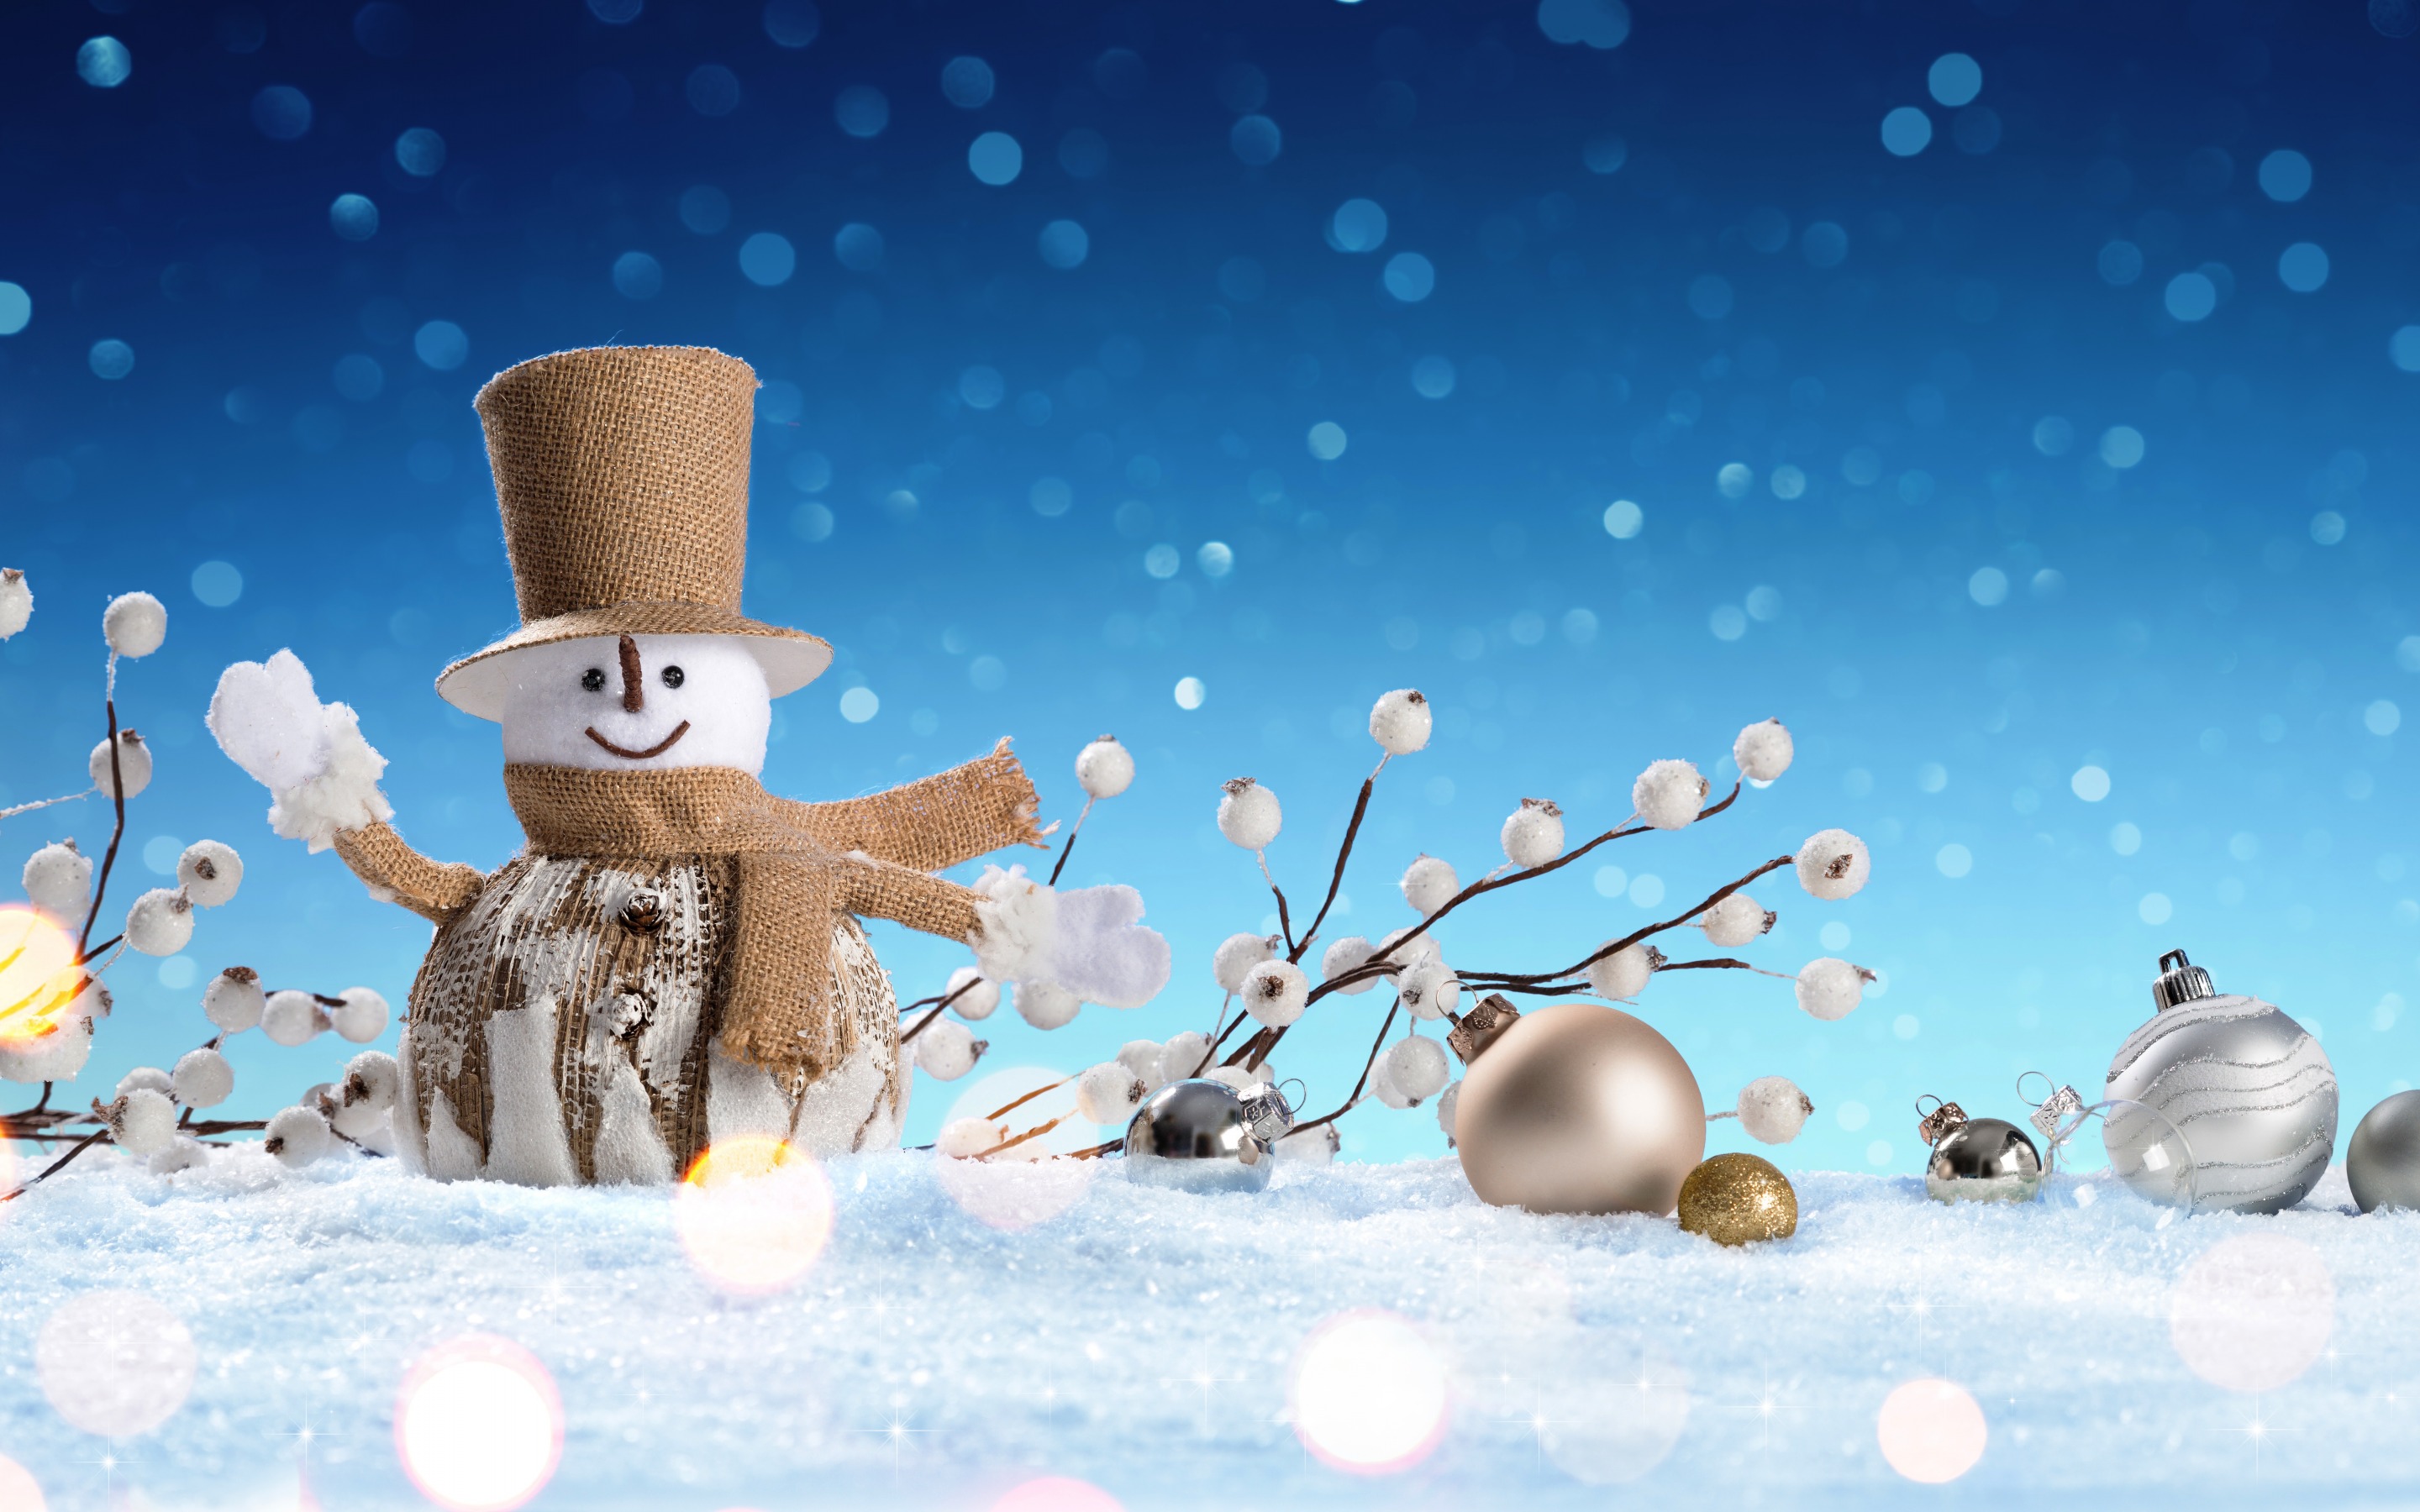 Download wallpaper winter, snowman, Christmas, snow, Christmas golden balls, New Year for desktop with resolution 2880x1800. High Quality HD picture wallpaper